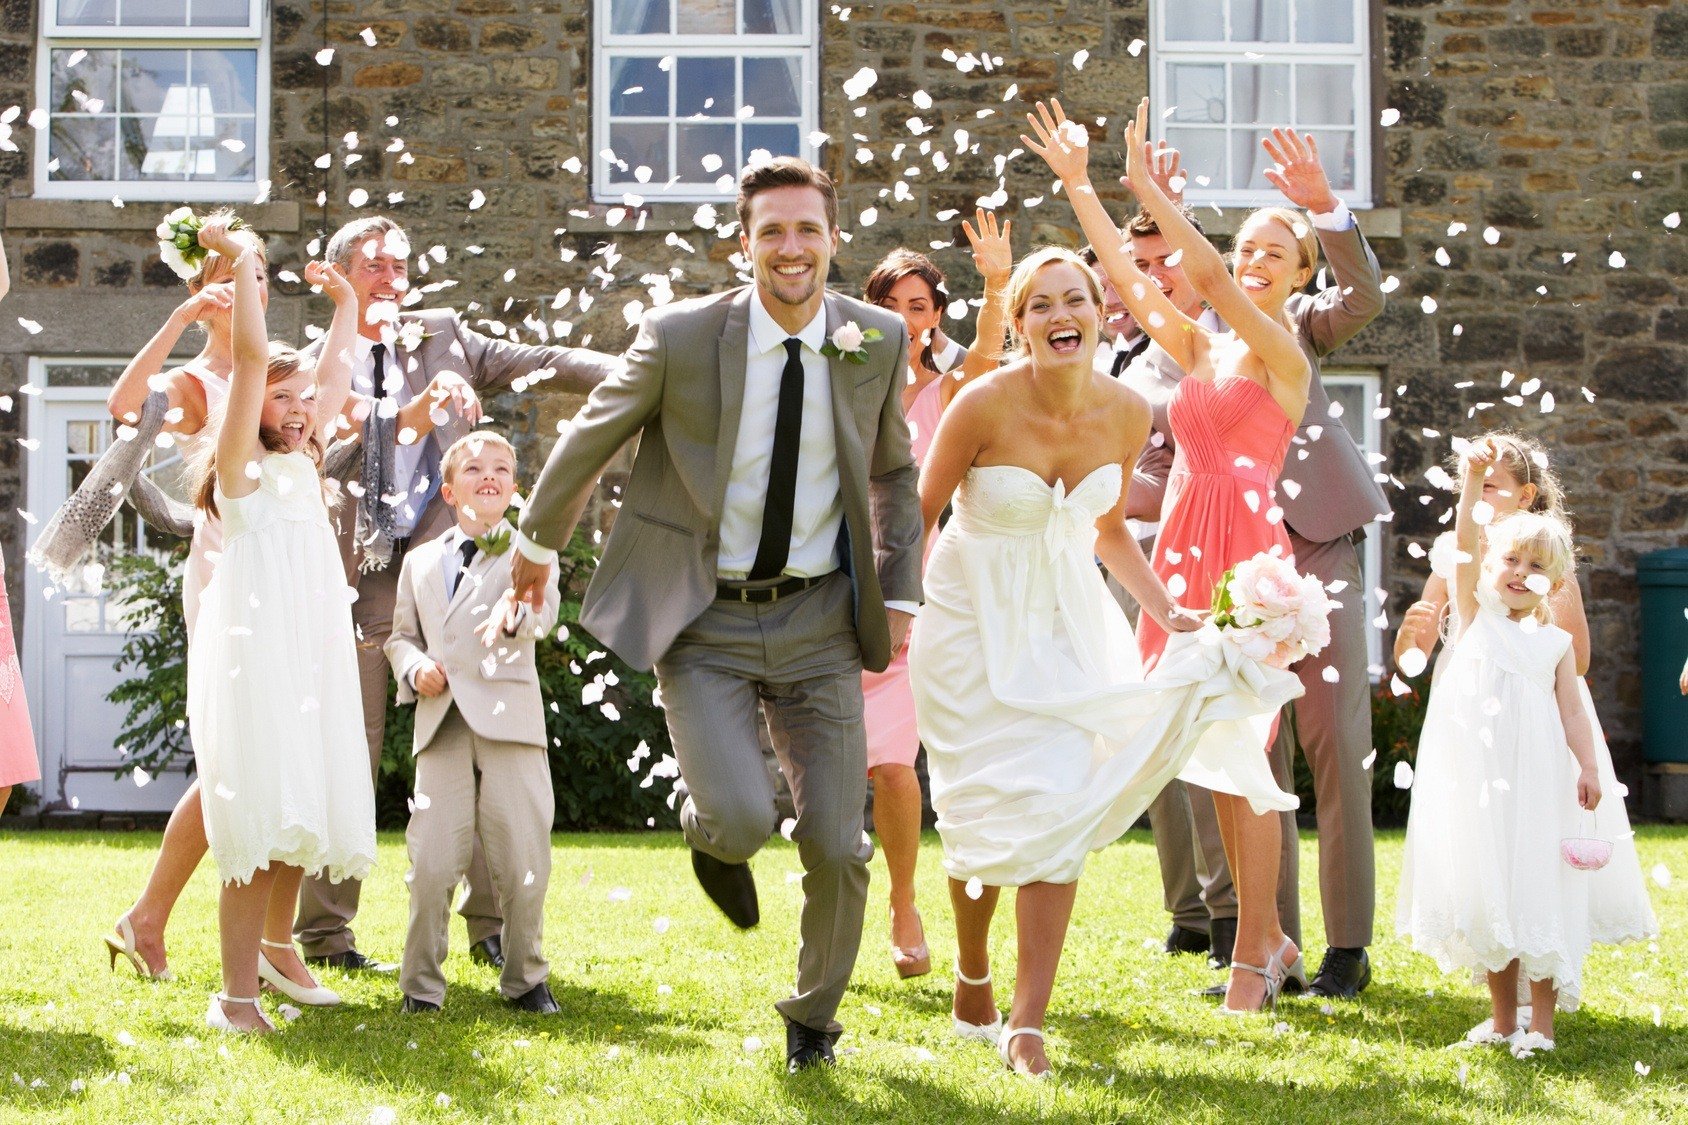 5 Ways To Write Off Your Wedding On Your Taxes and Help Others.